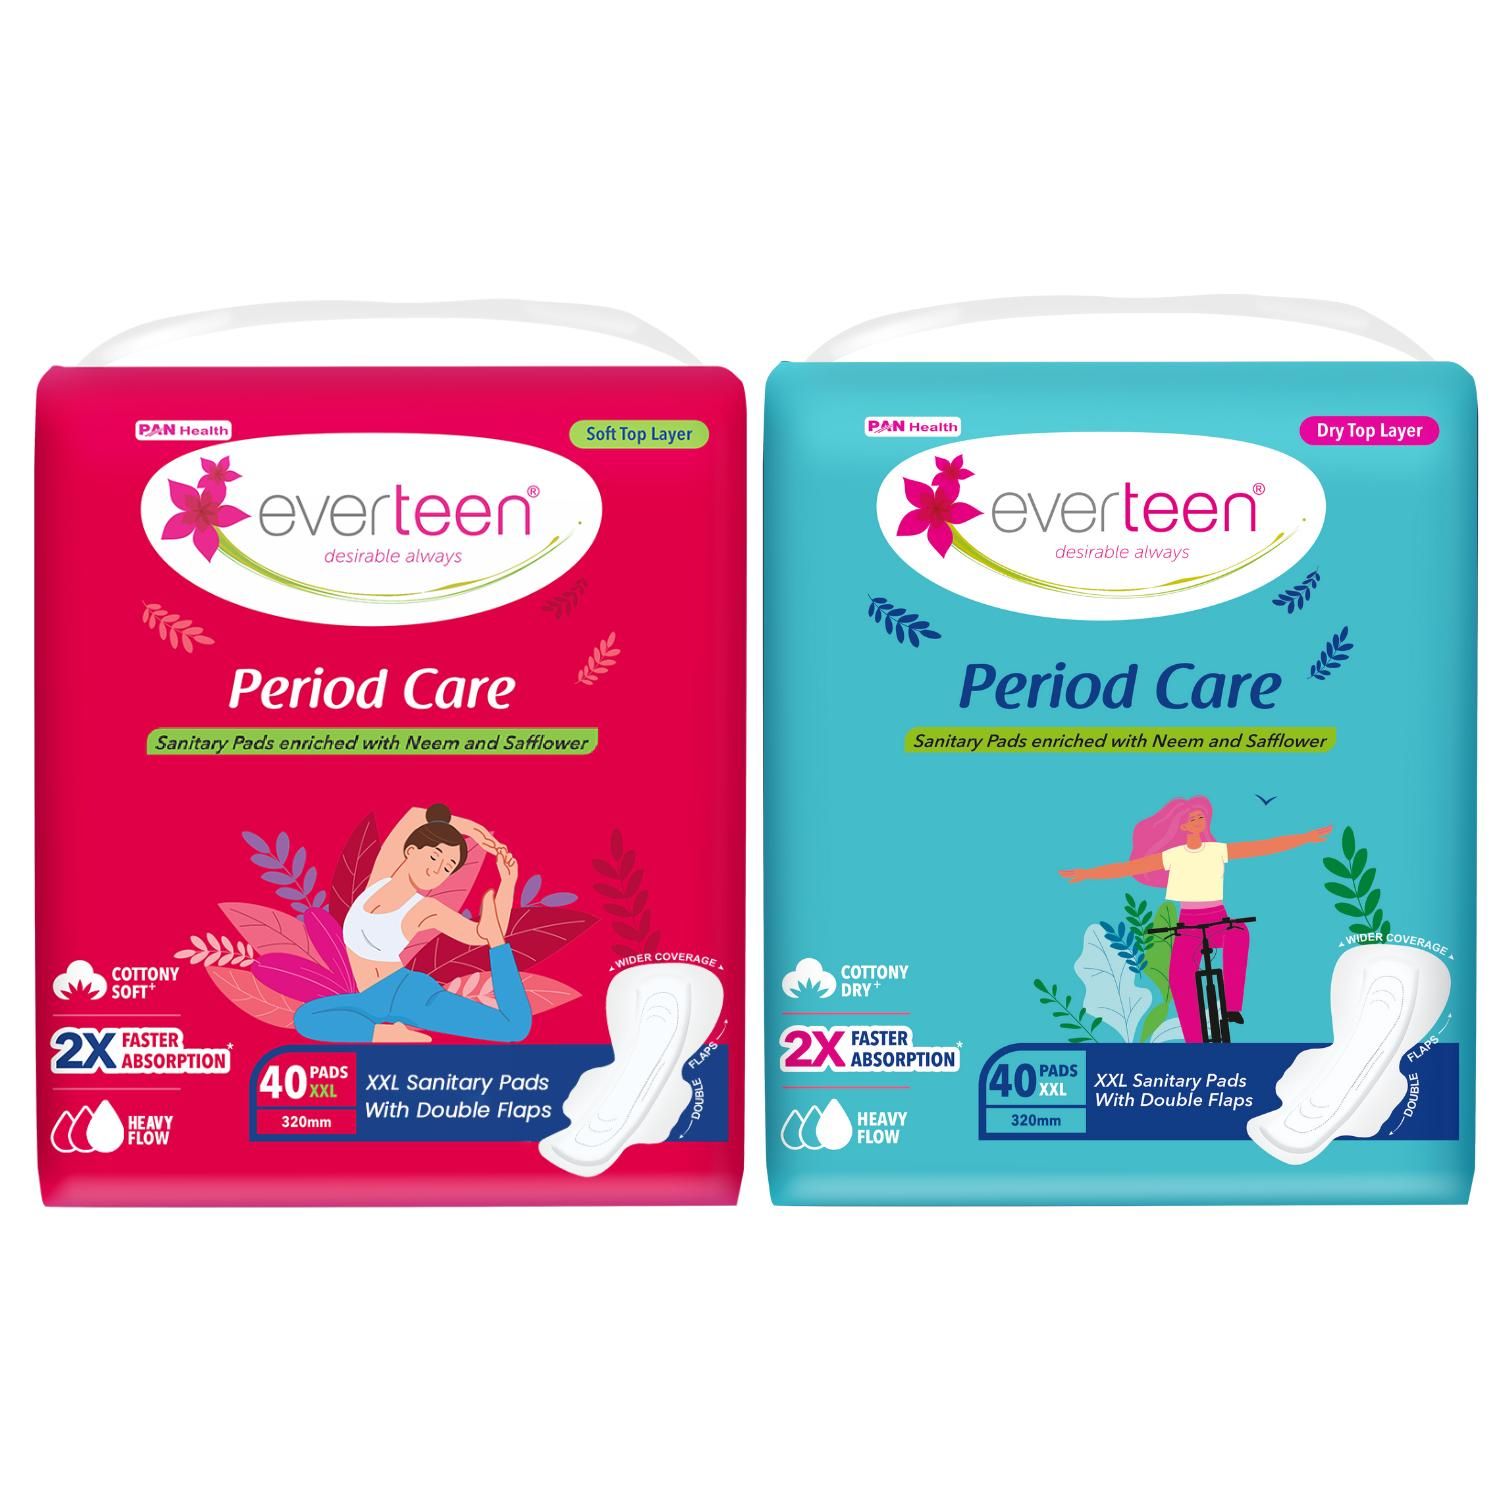 Buy everteen XXL Sanitary Napkin Pads with Cottony-Dry Top & cottony - soft Layer for Women Enriched with Neem and Safflower - 1 Pack (40 Pads 320 mm) - Purplle